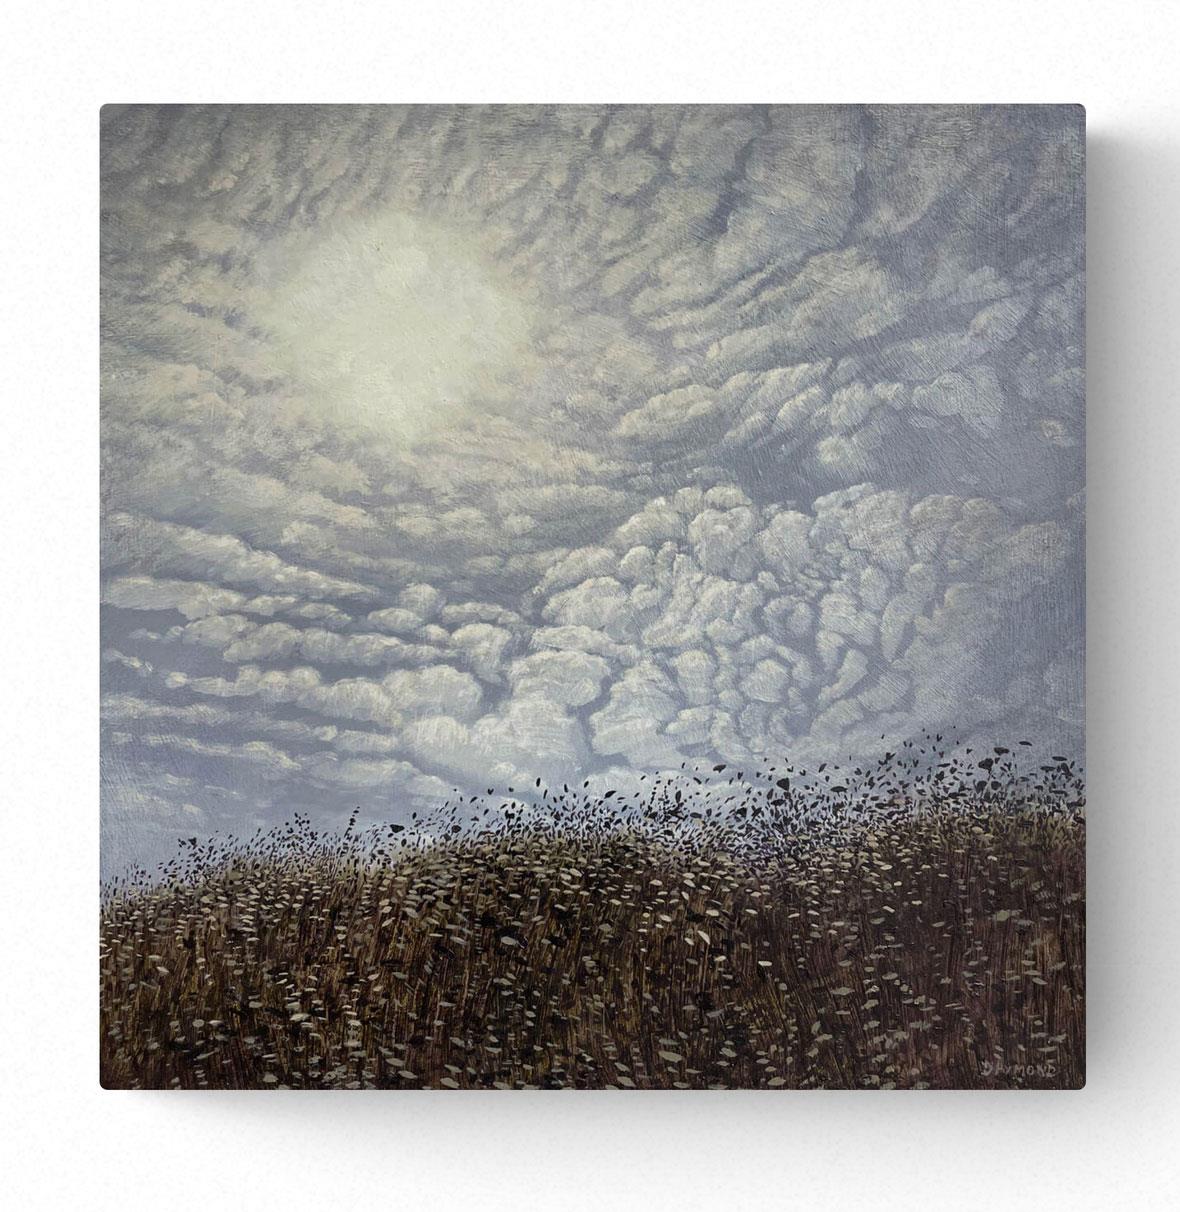 oil painting of a the sun shining through clouds and a landscape